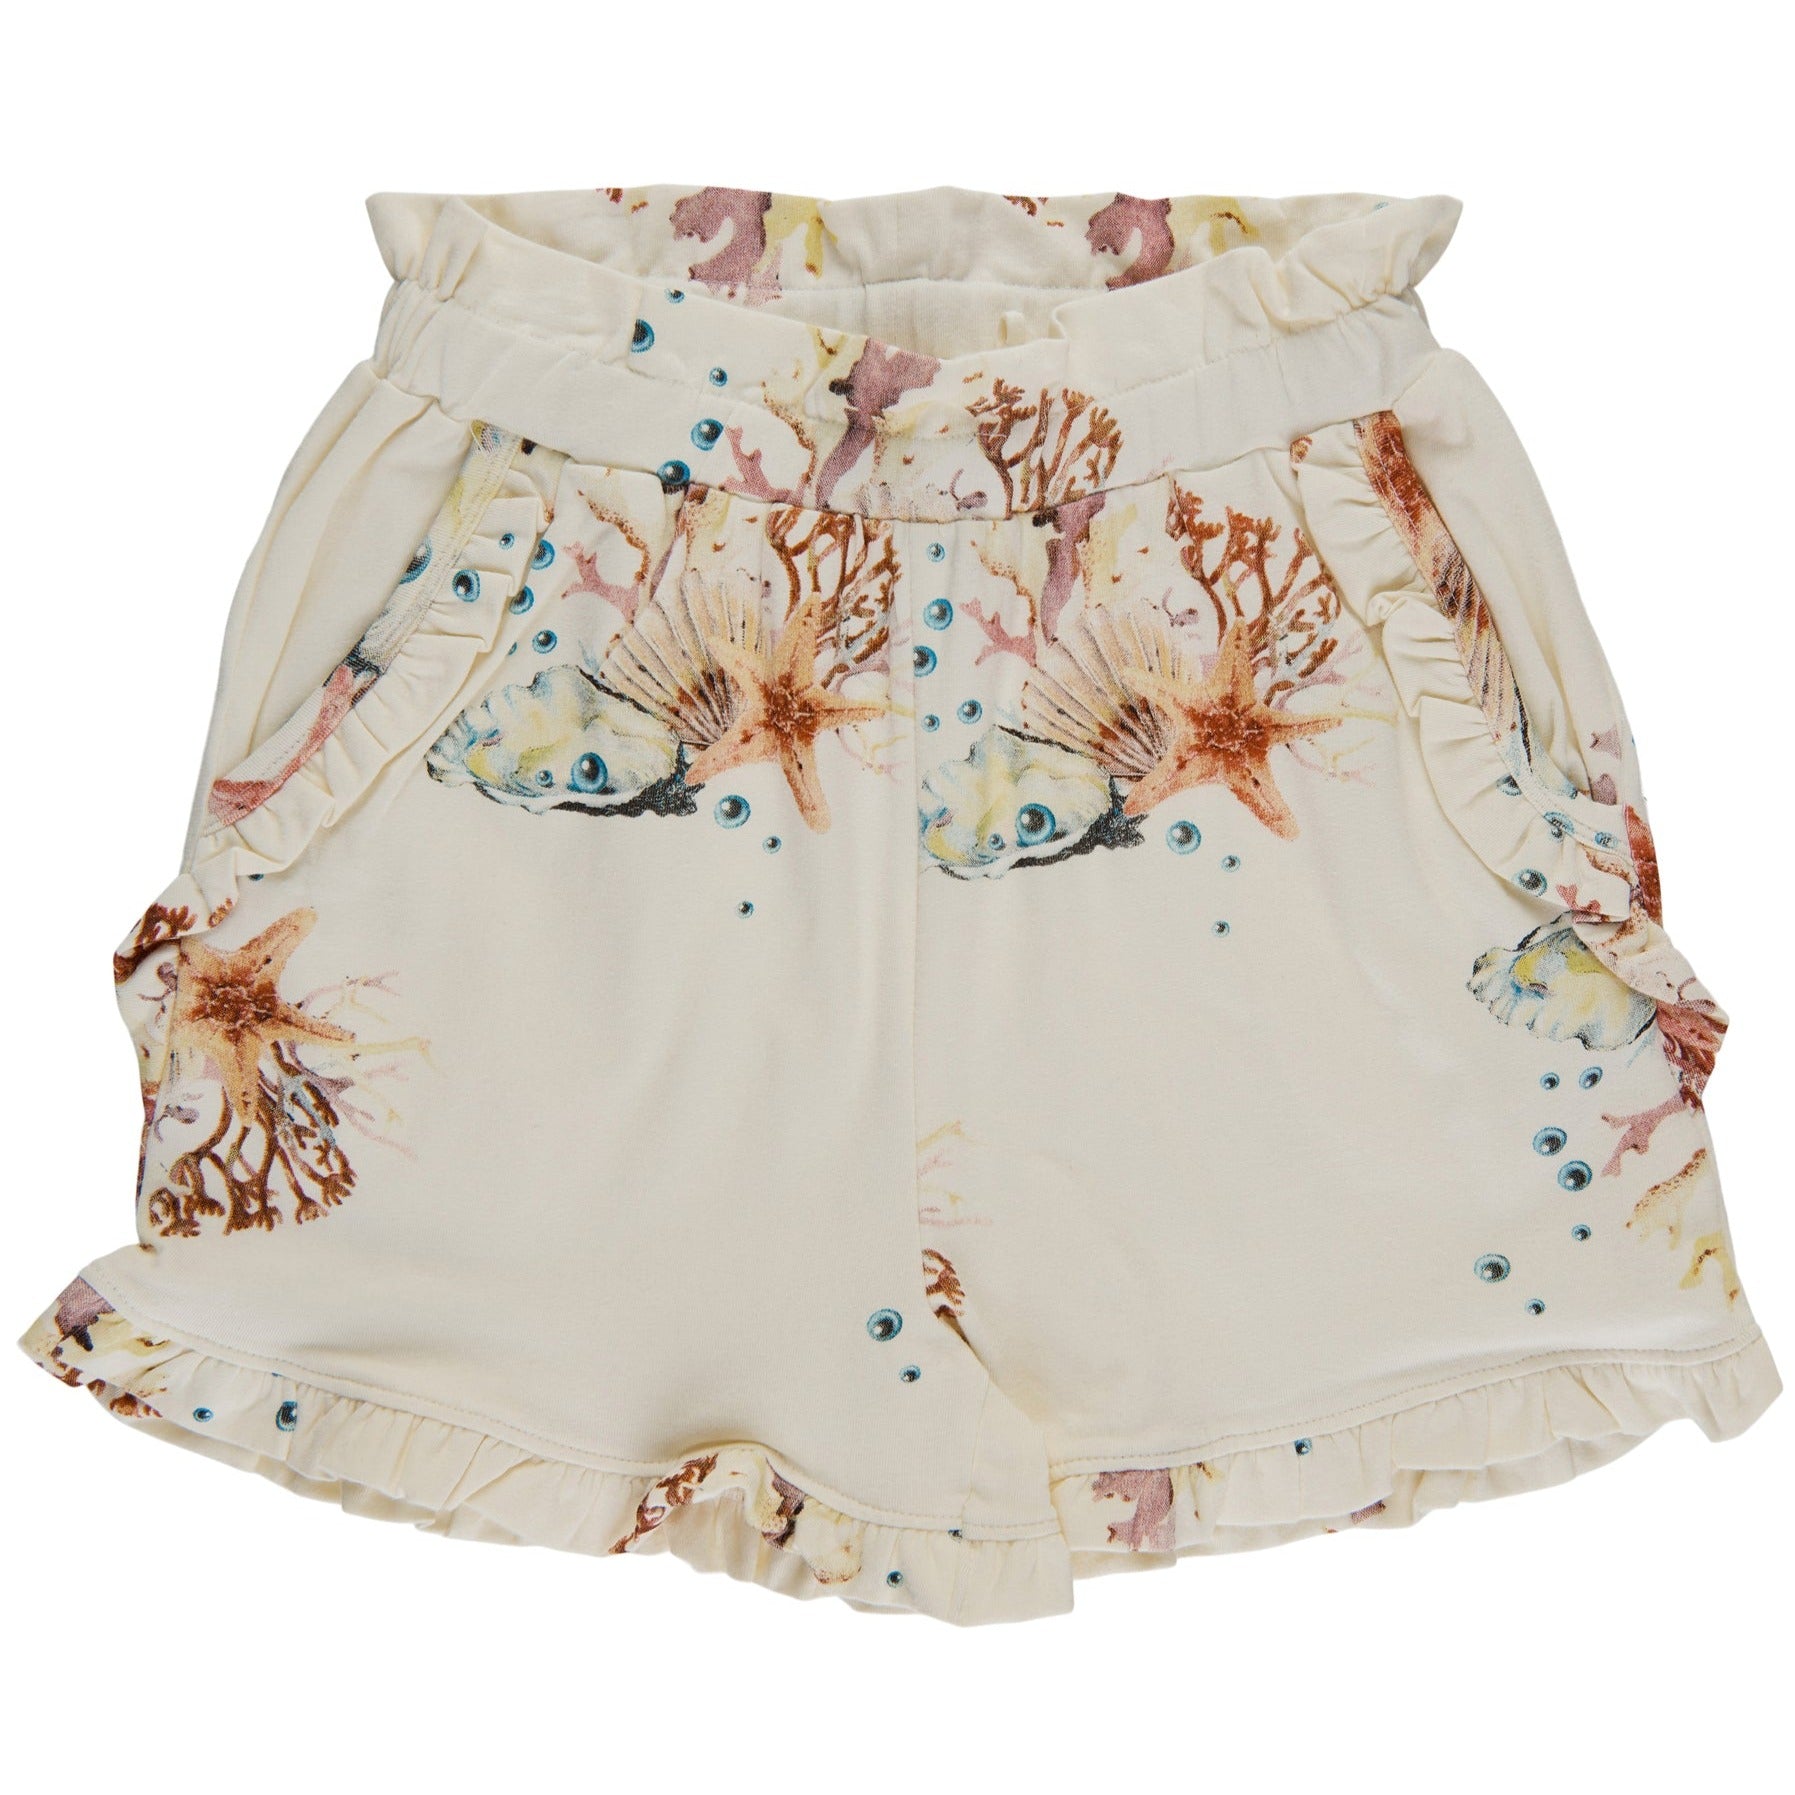 THE NEW - Giselle Shorts (TN4940) - White Swan Coral AOP